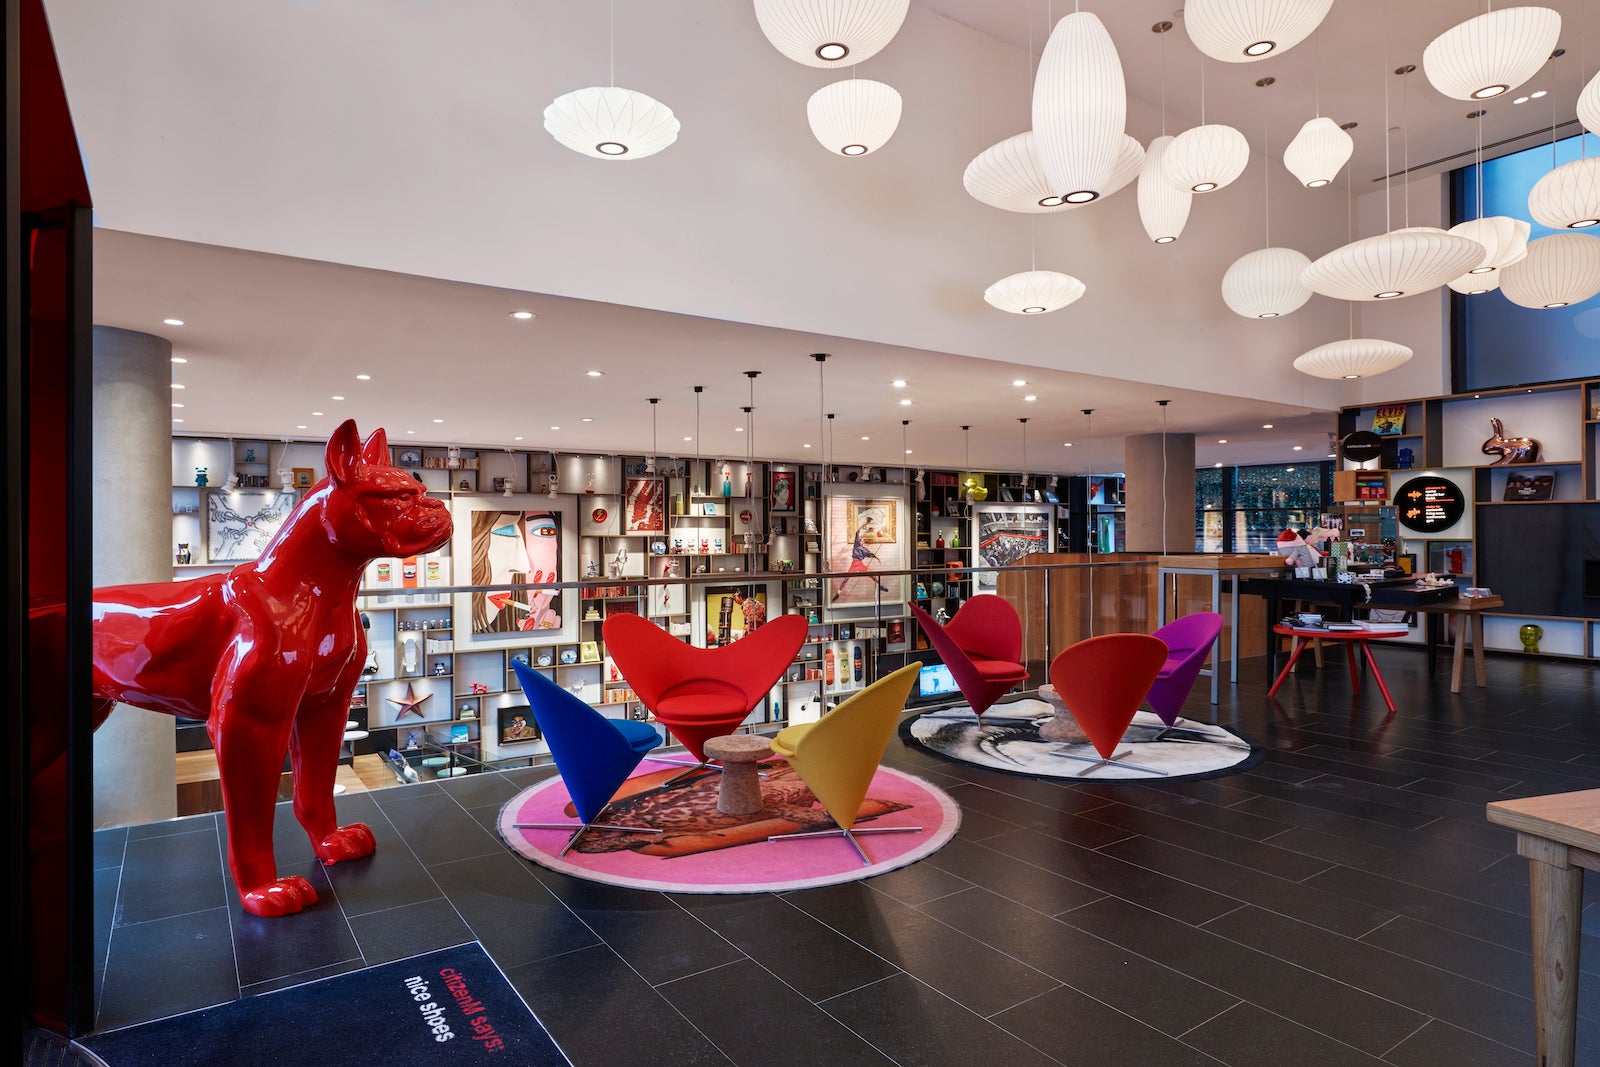 wall full of art, colorful chairs shaped like hearts and large red statue of dog